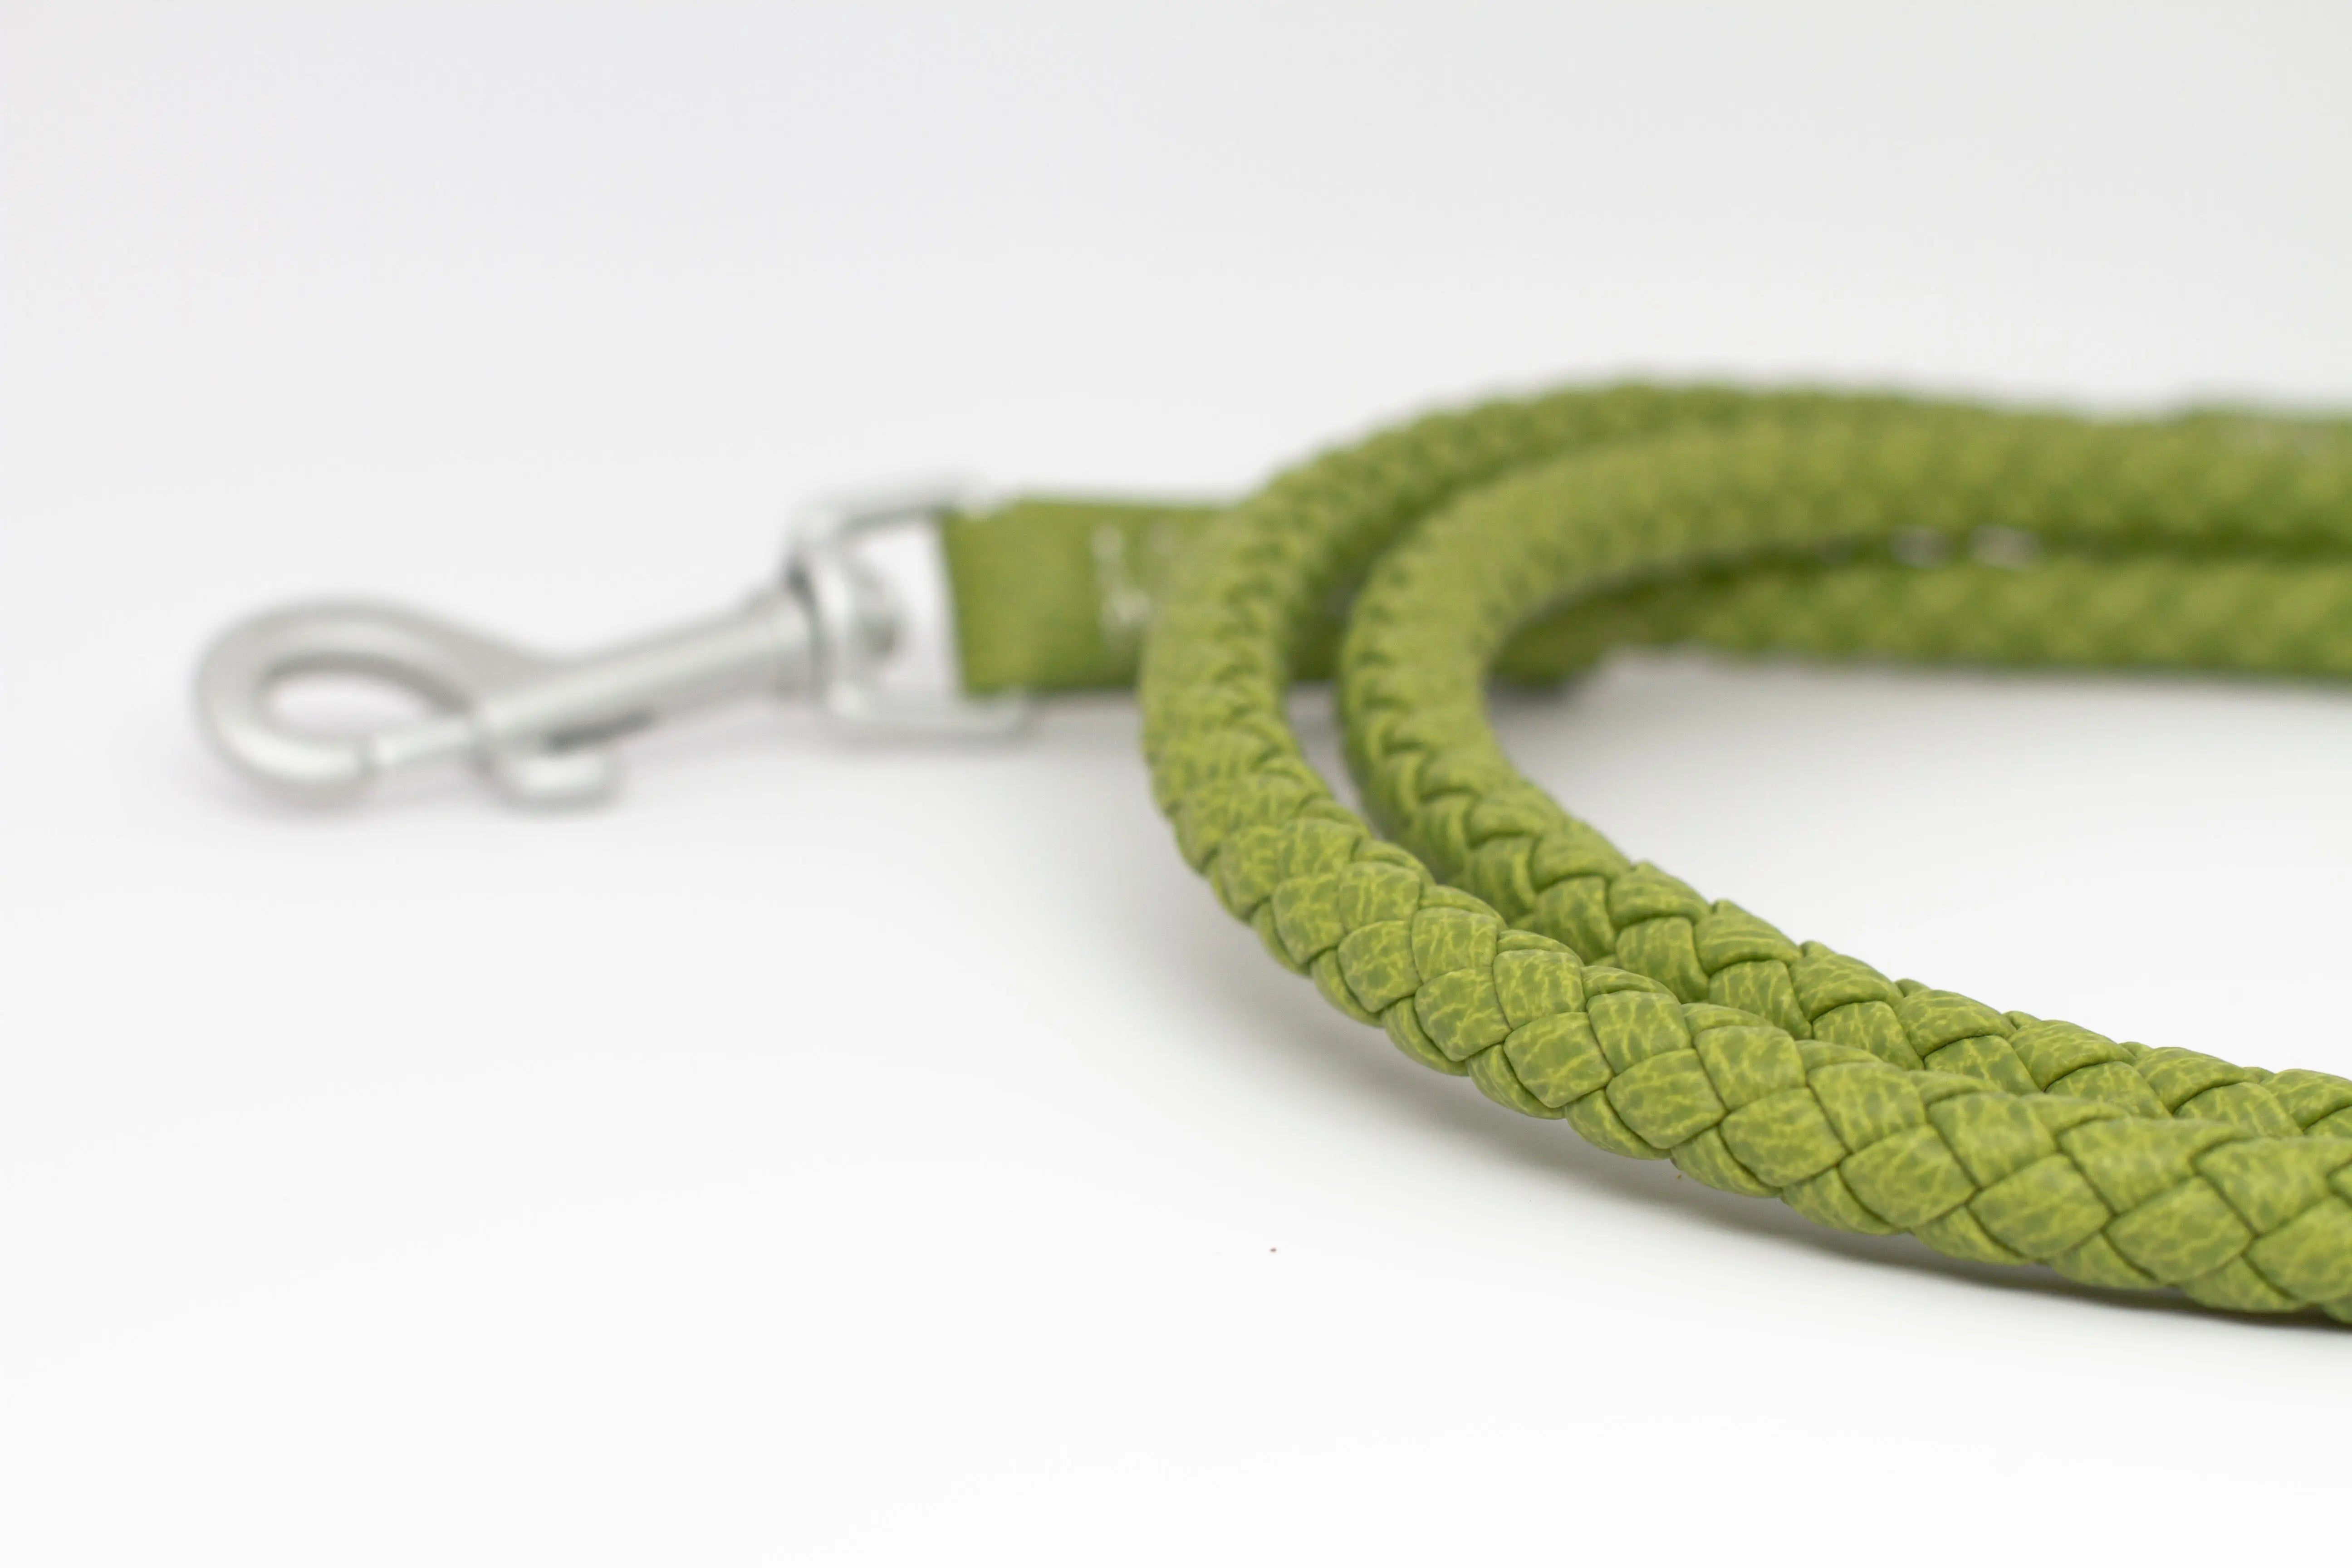 Close up of a waterproof and durable dog leash with marine grade anodized aluminum hardware in the color lime green.